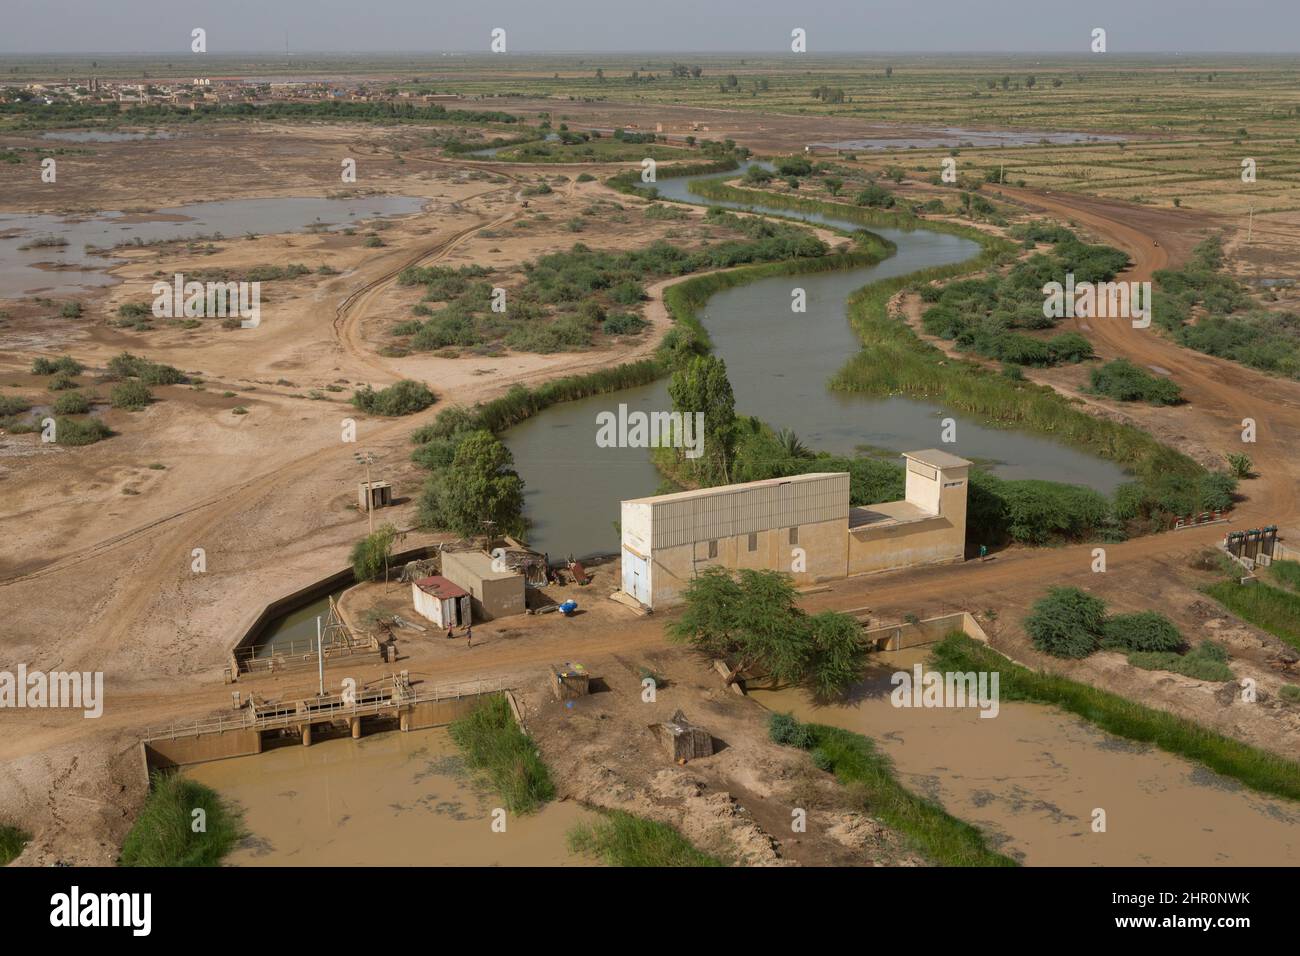 Irrigation infrastructure in the Senegal River Delta Stock Photo